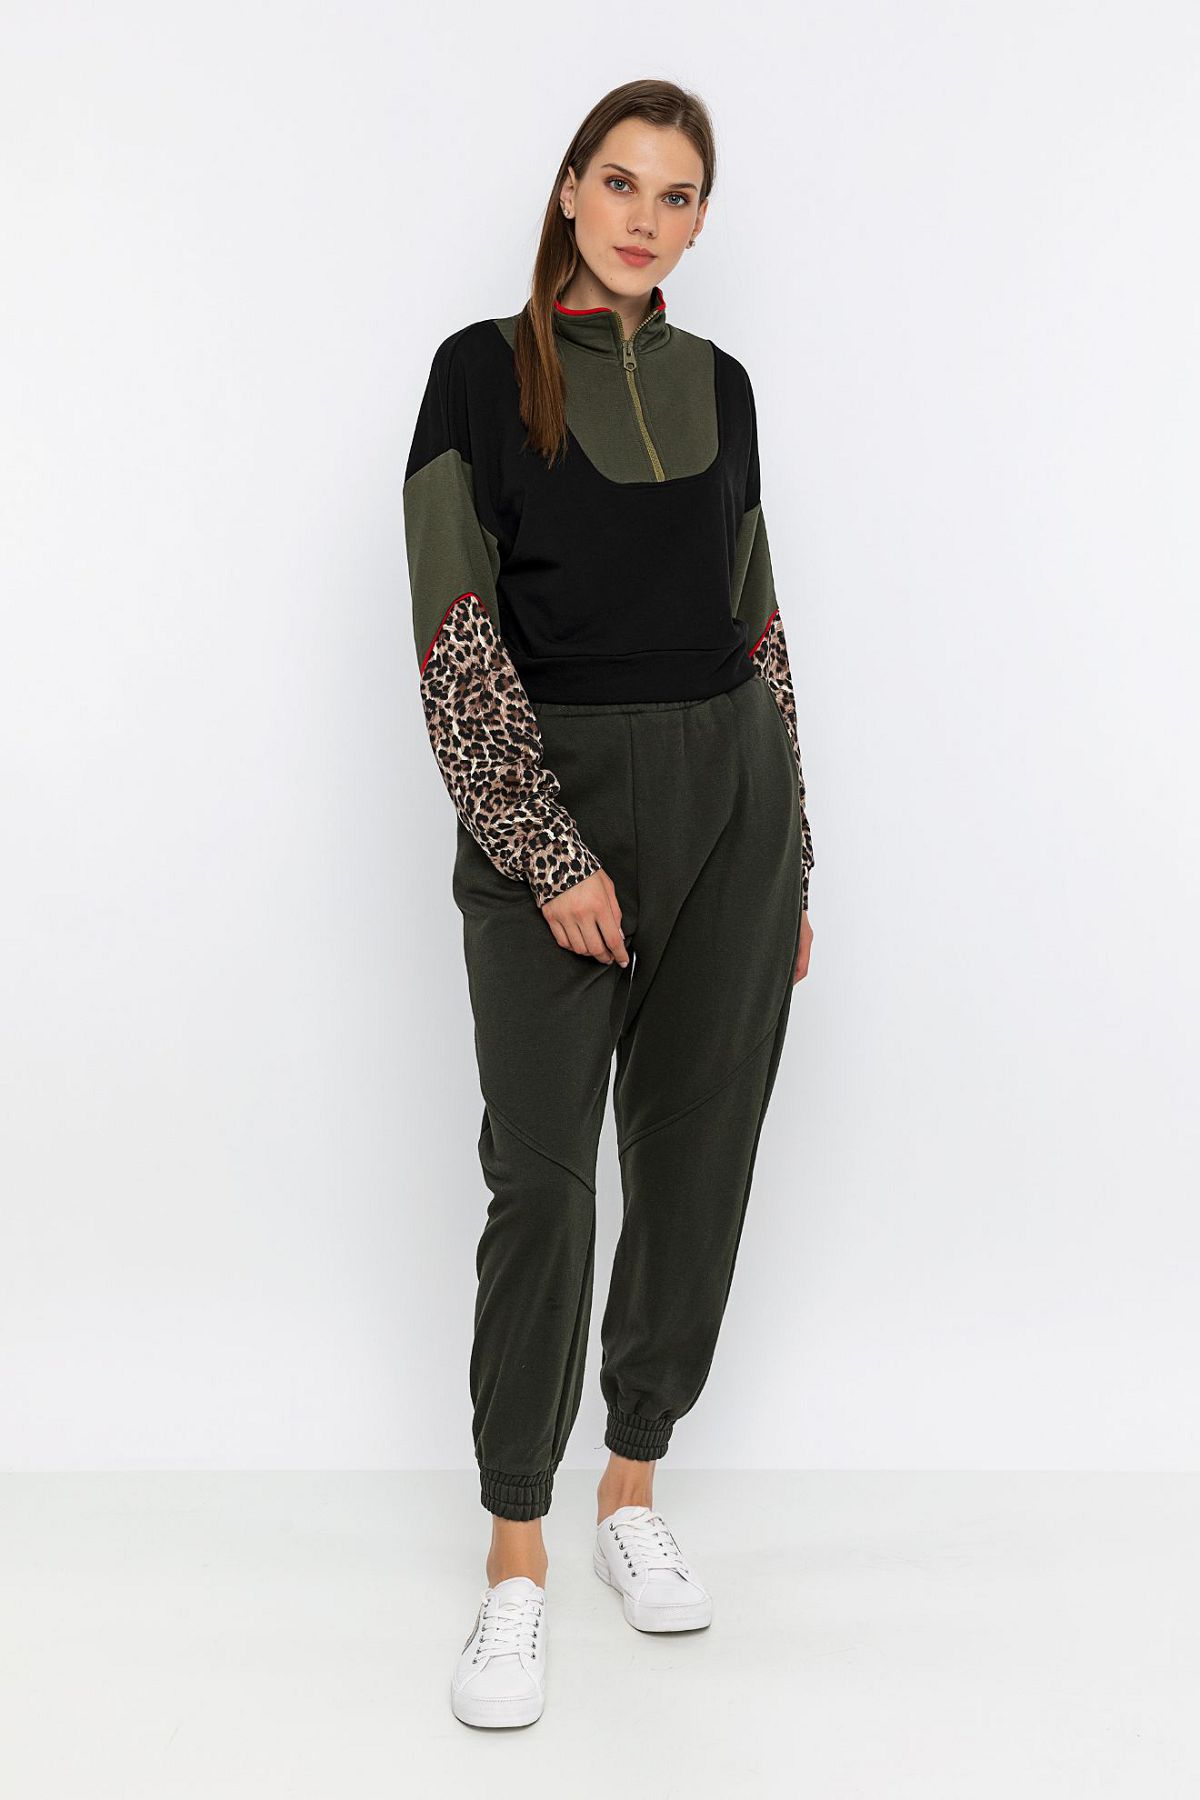 Picture of Leopard Patterned Zipped Tracksuit Suit